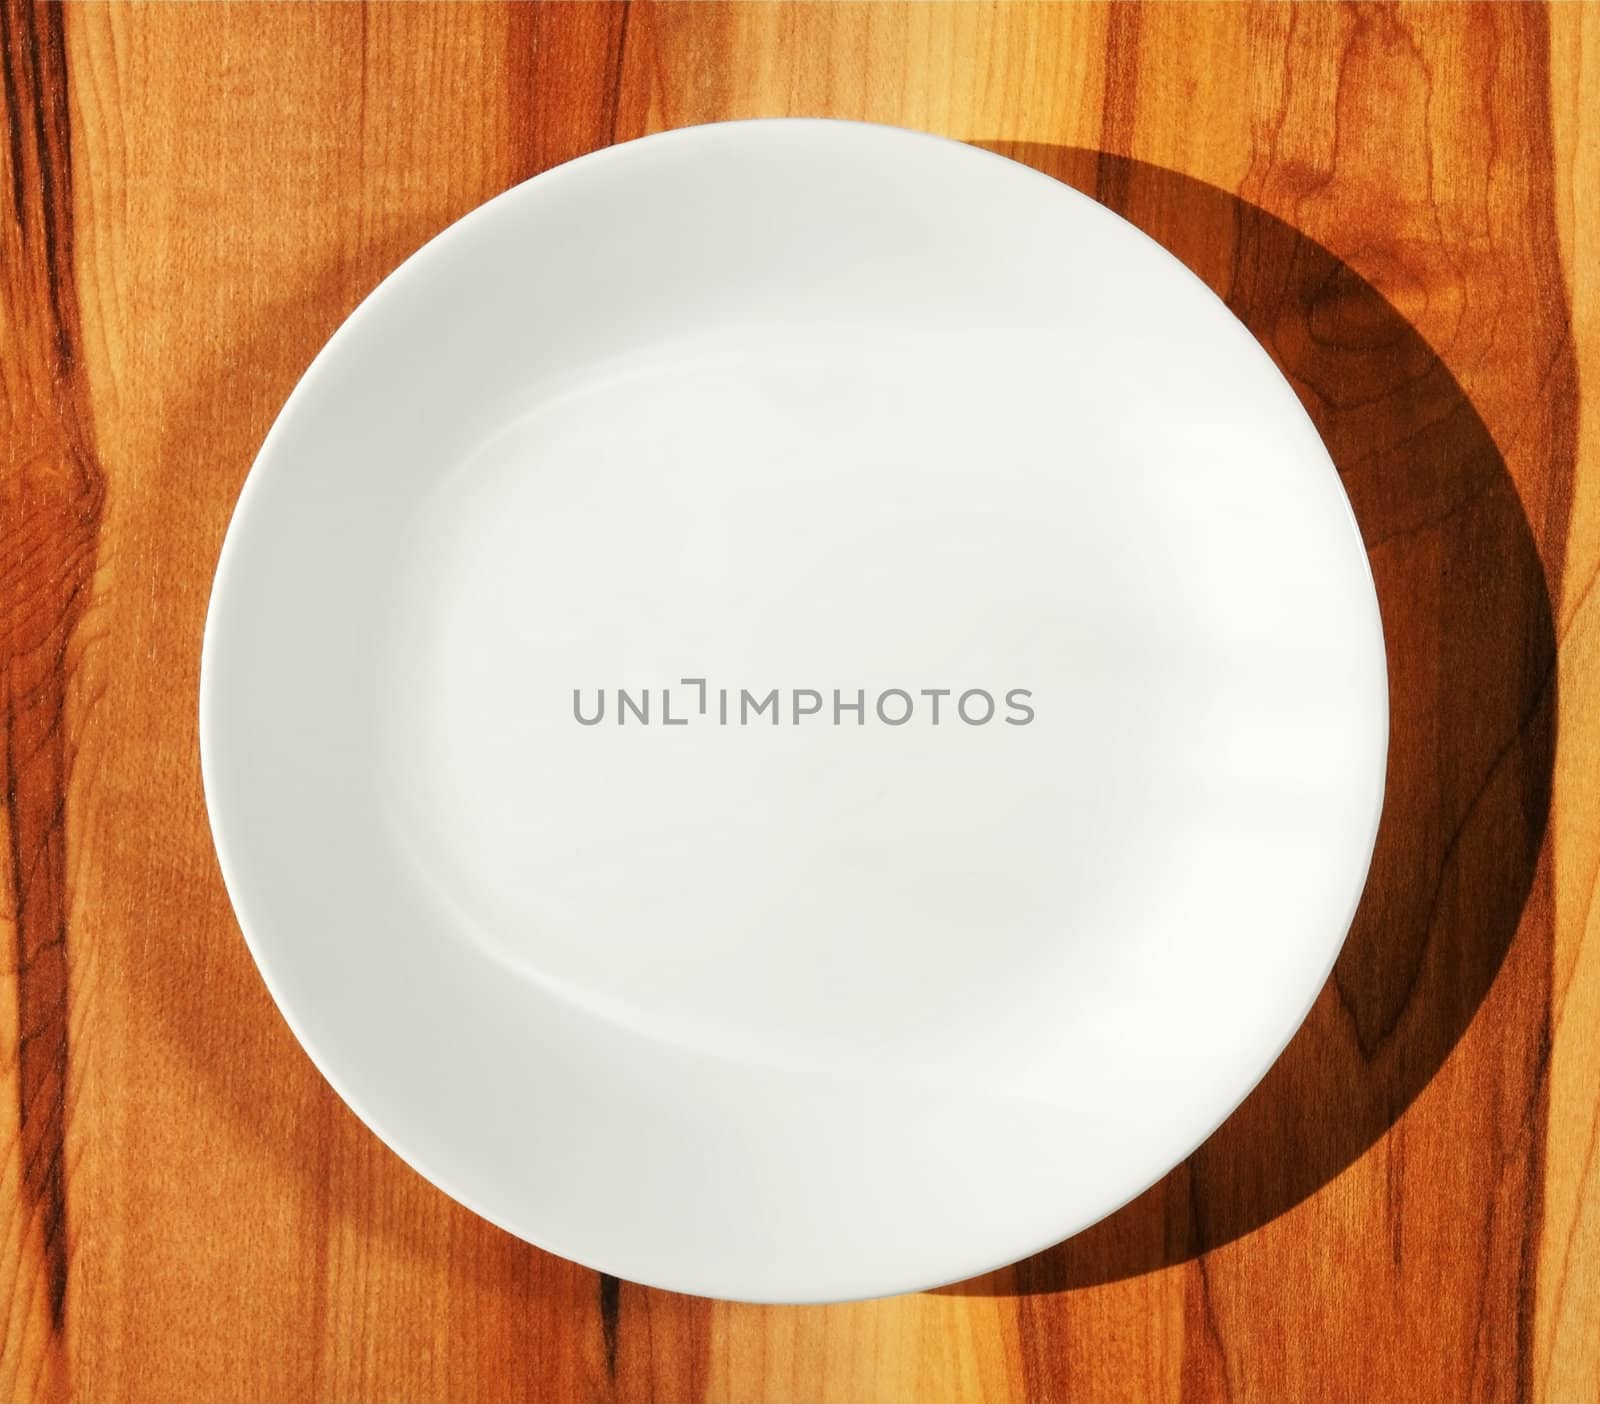 Pure white porcelain dinner plate on kitchen hard wood table with shadow.